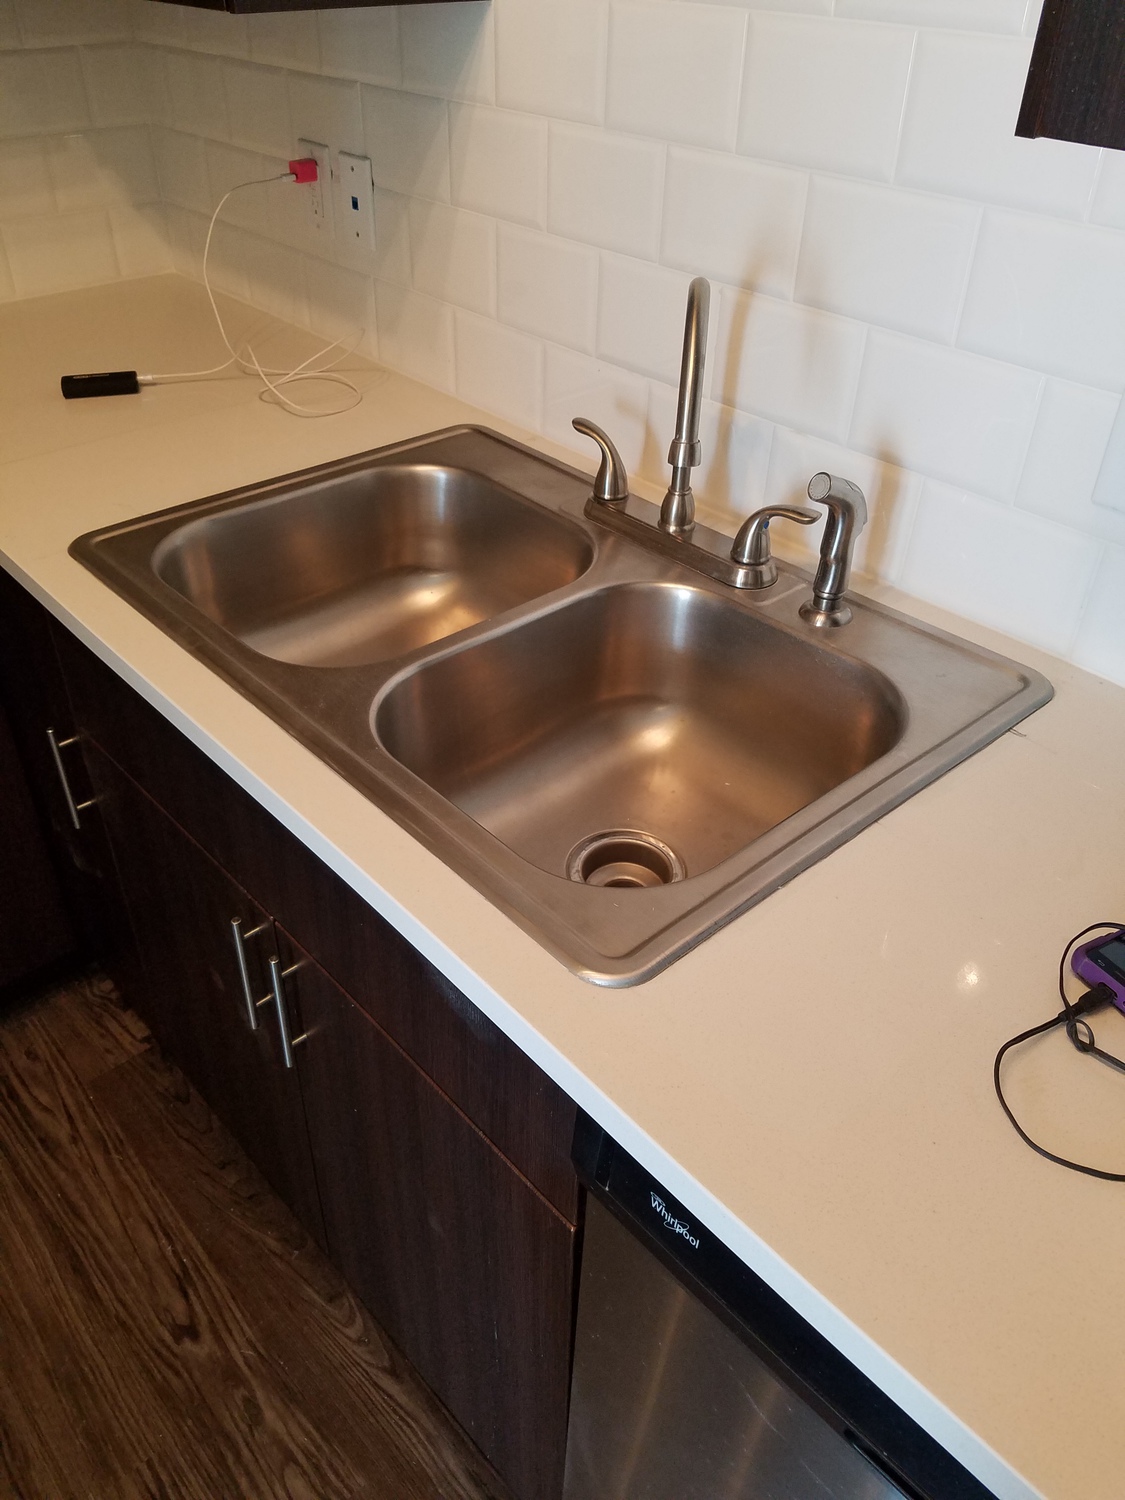 Polished out stainless steel kitchen sinks makes it look brand new again after construction work damage